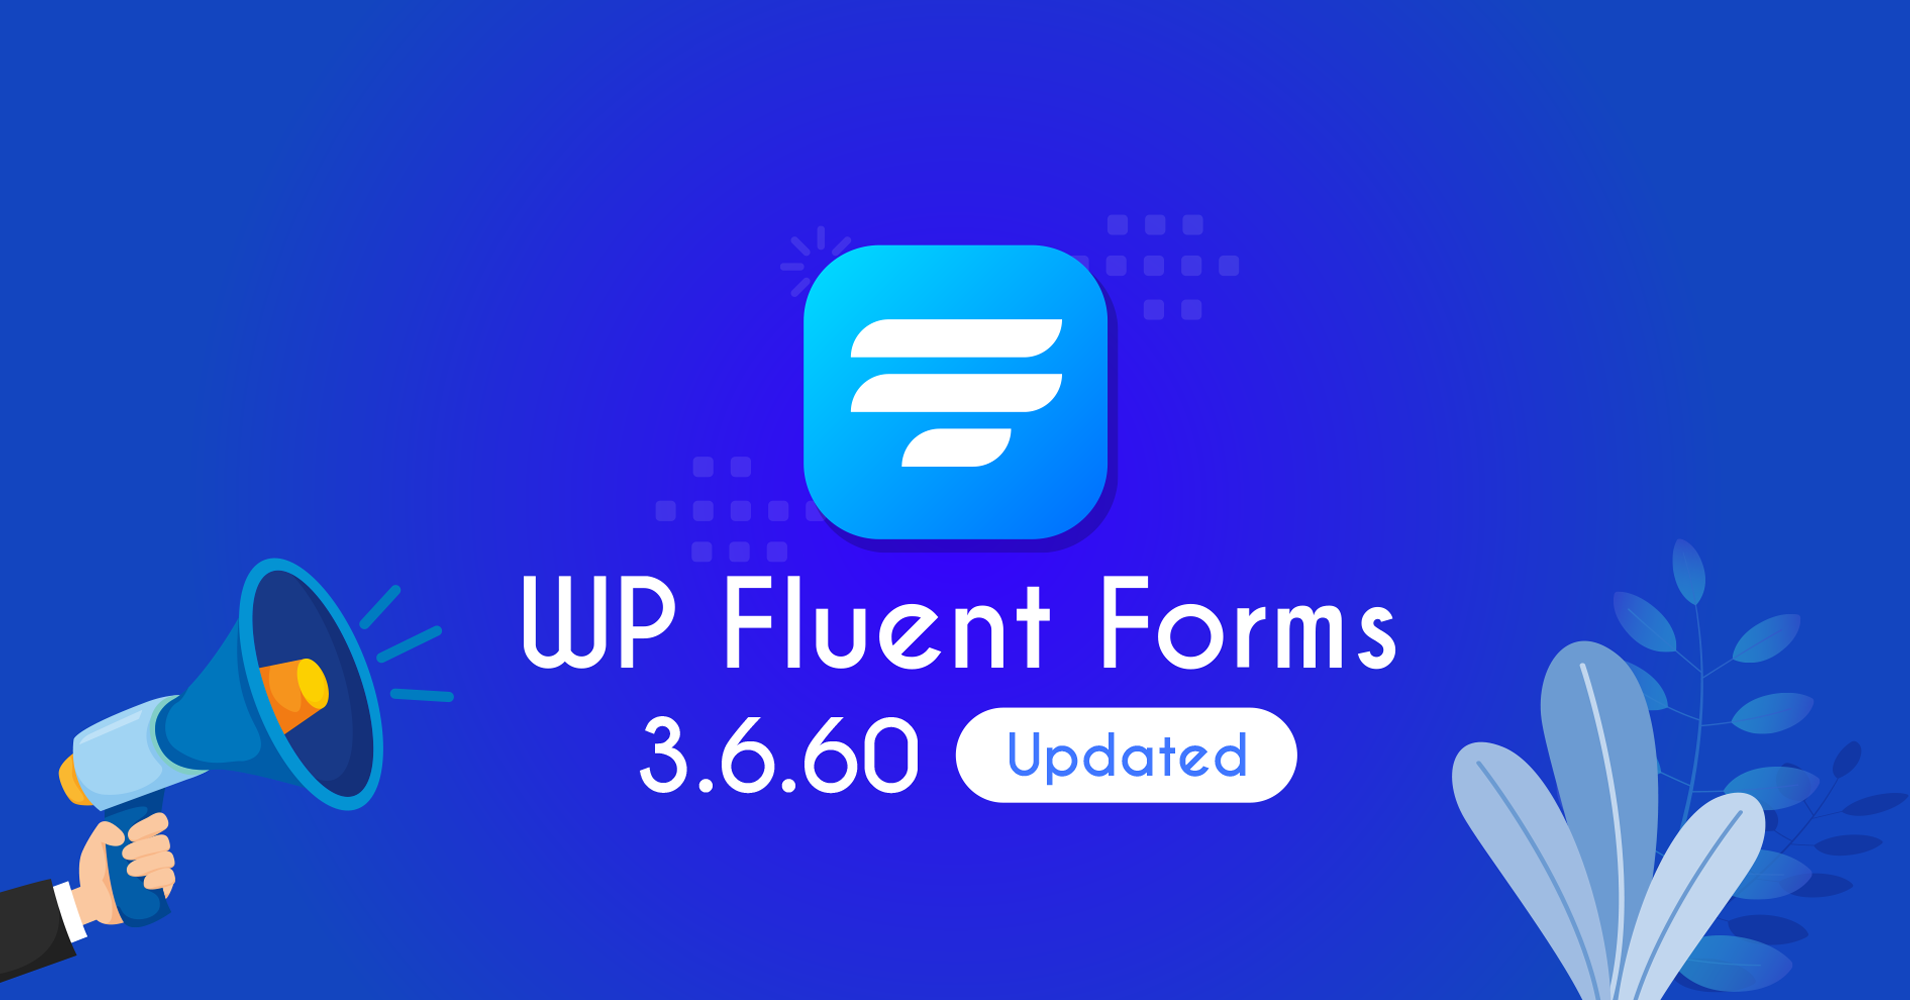 Fluent Forms 3.6.60 – Awesome New Features and Improvements